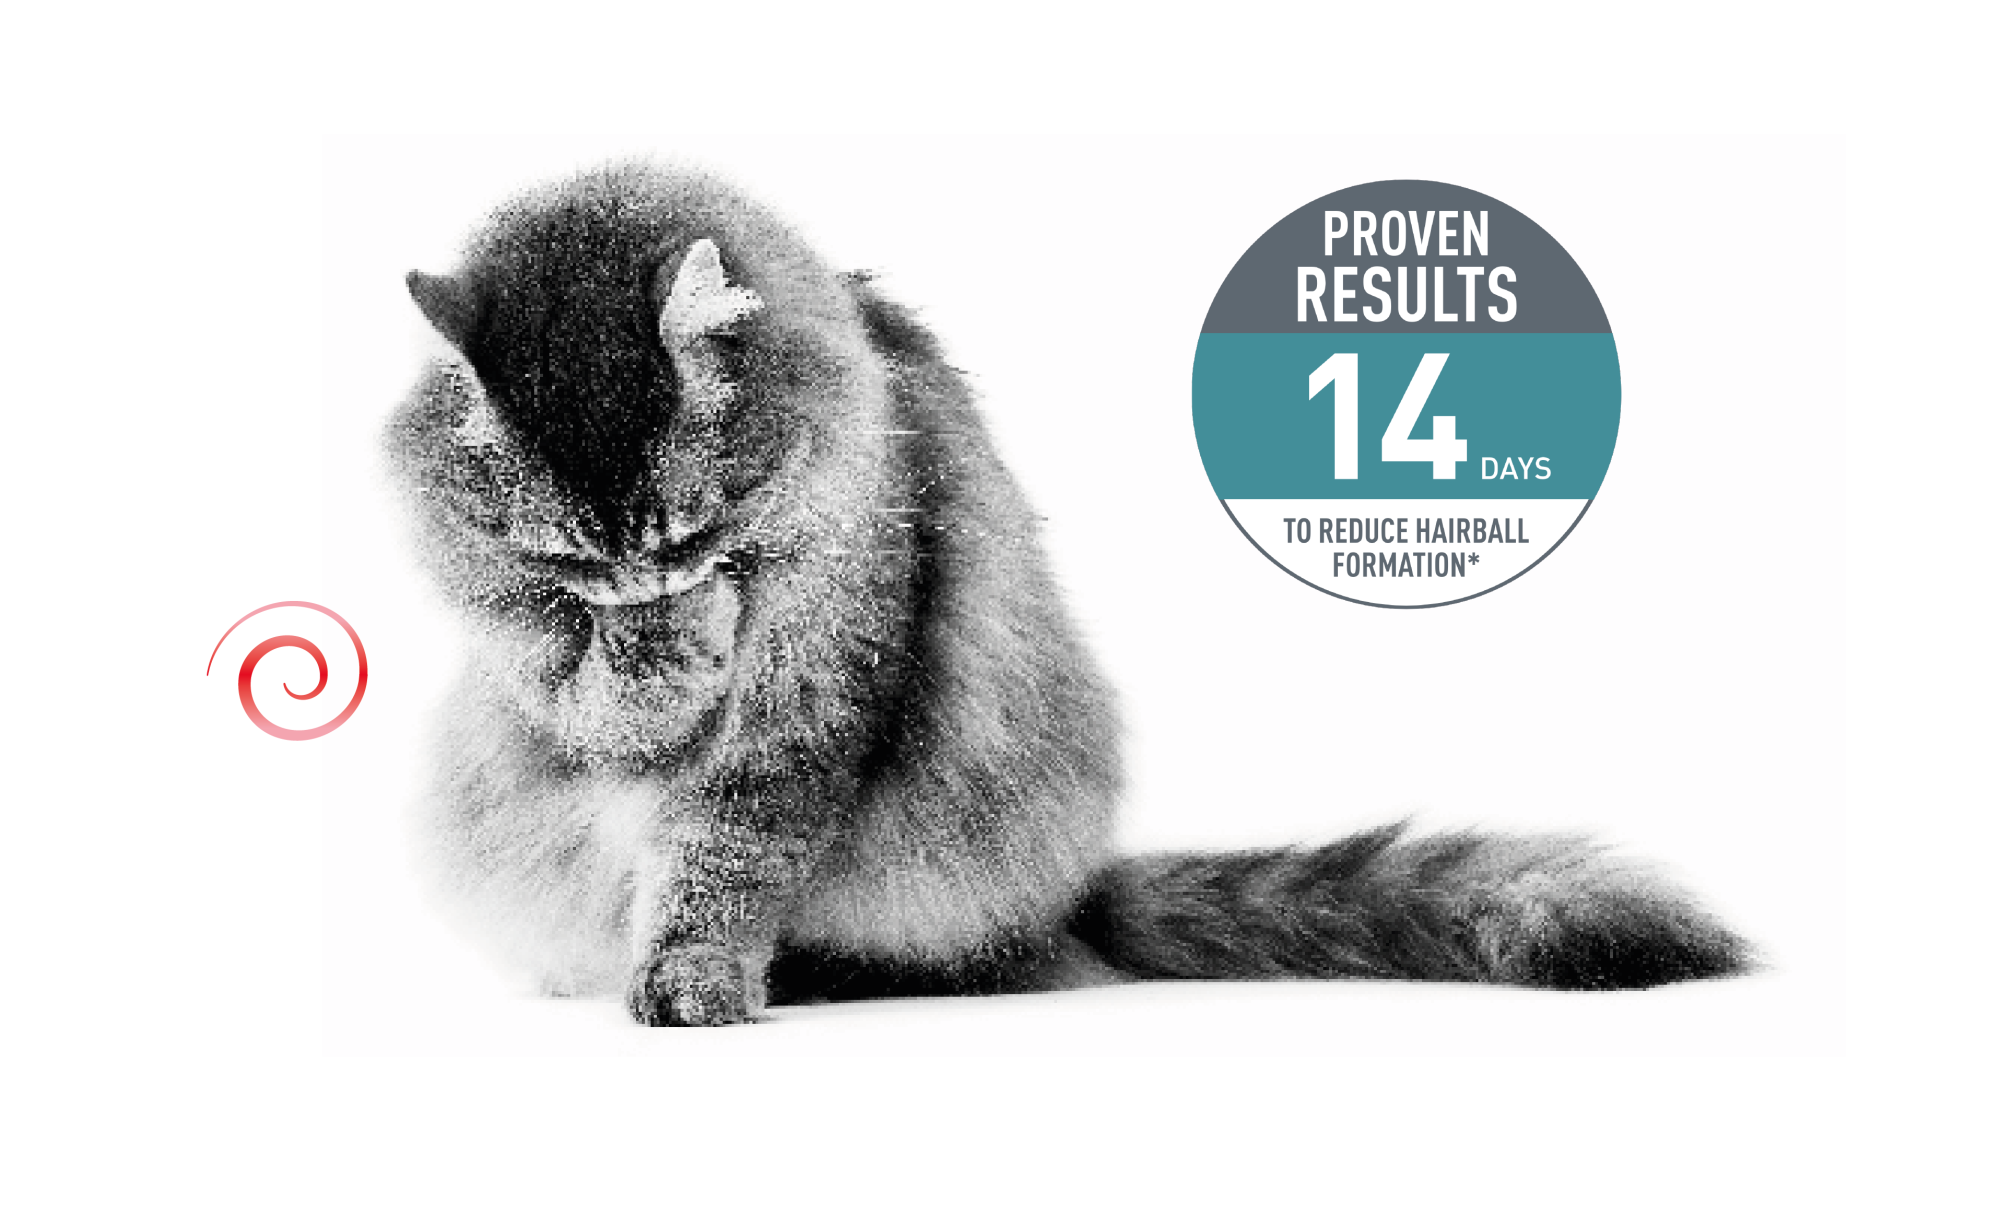 Emblematic of cat with hairball sensitivity and associated proven results